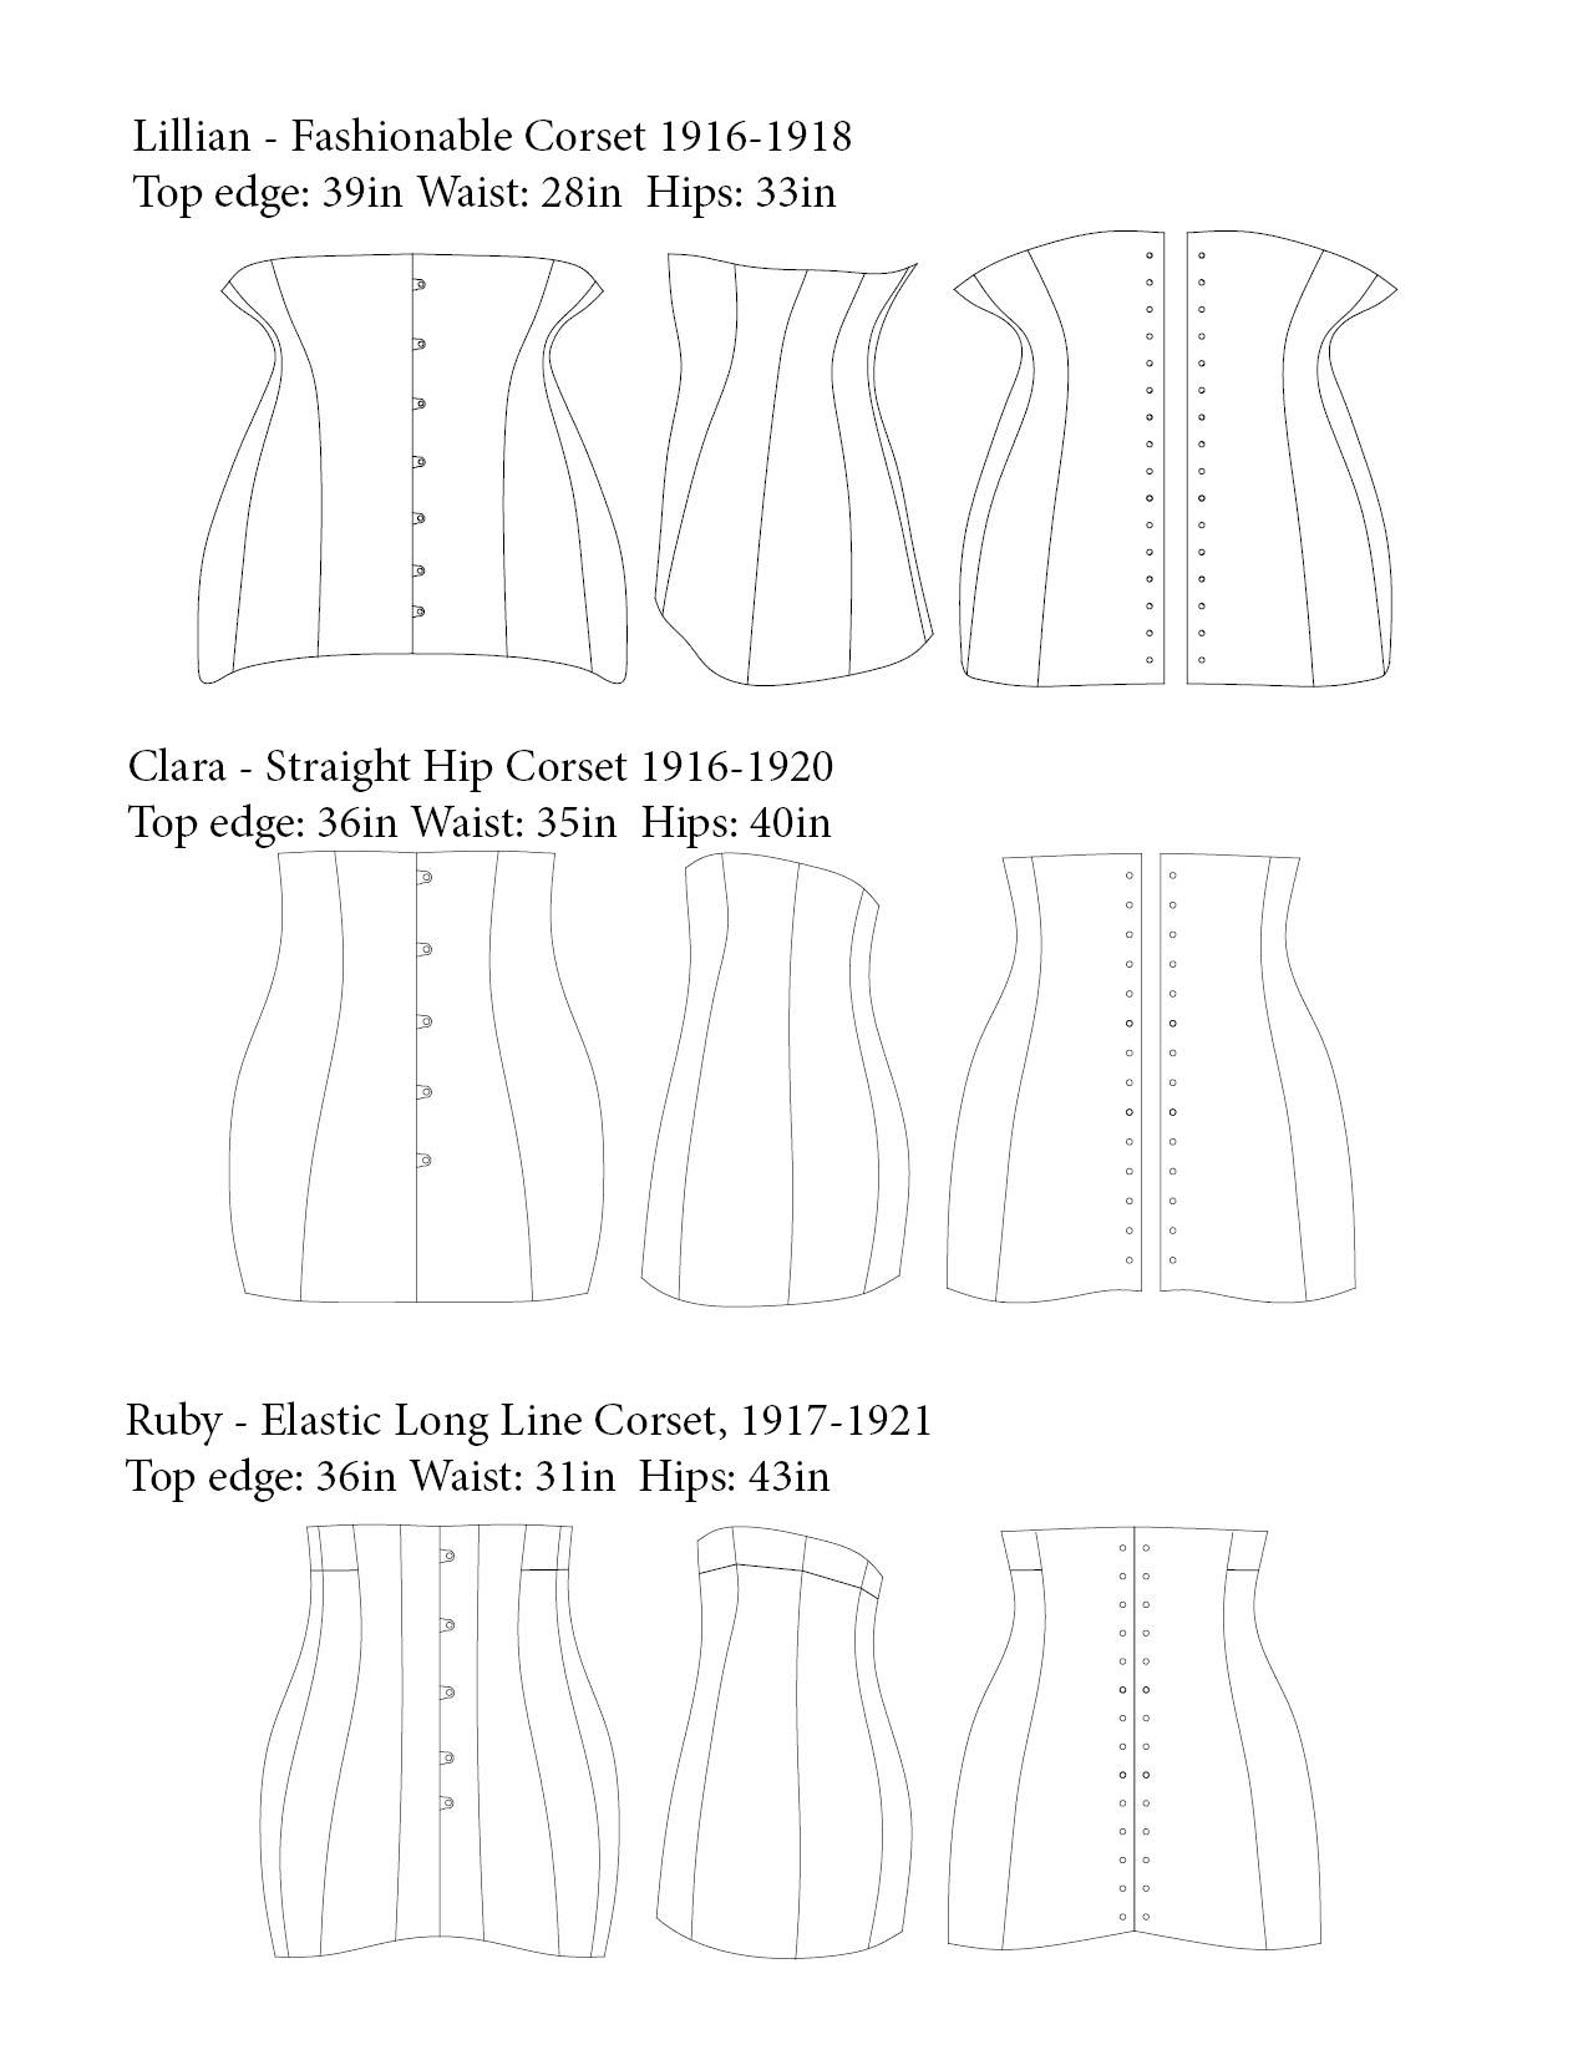 10 Unique 1910s and WW1 Corset Patterns and 1 Brassiere | Etsy